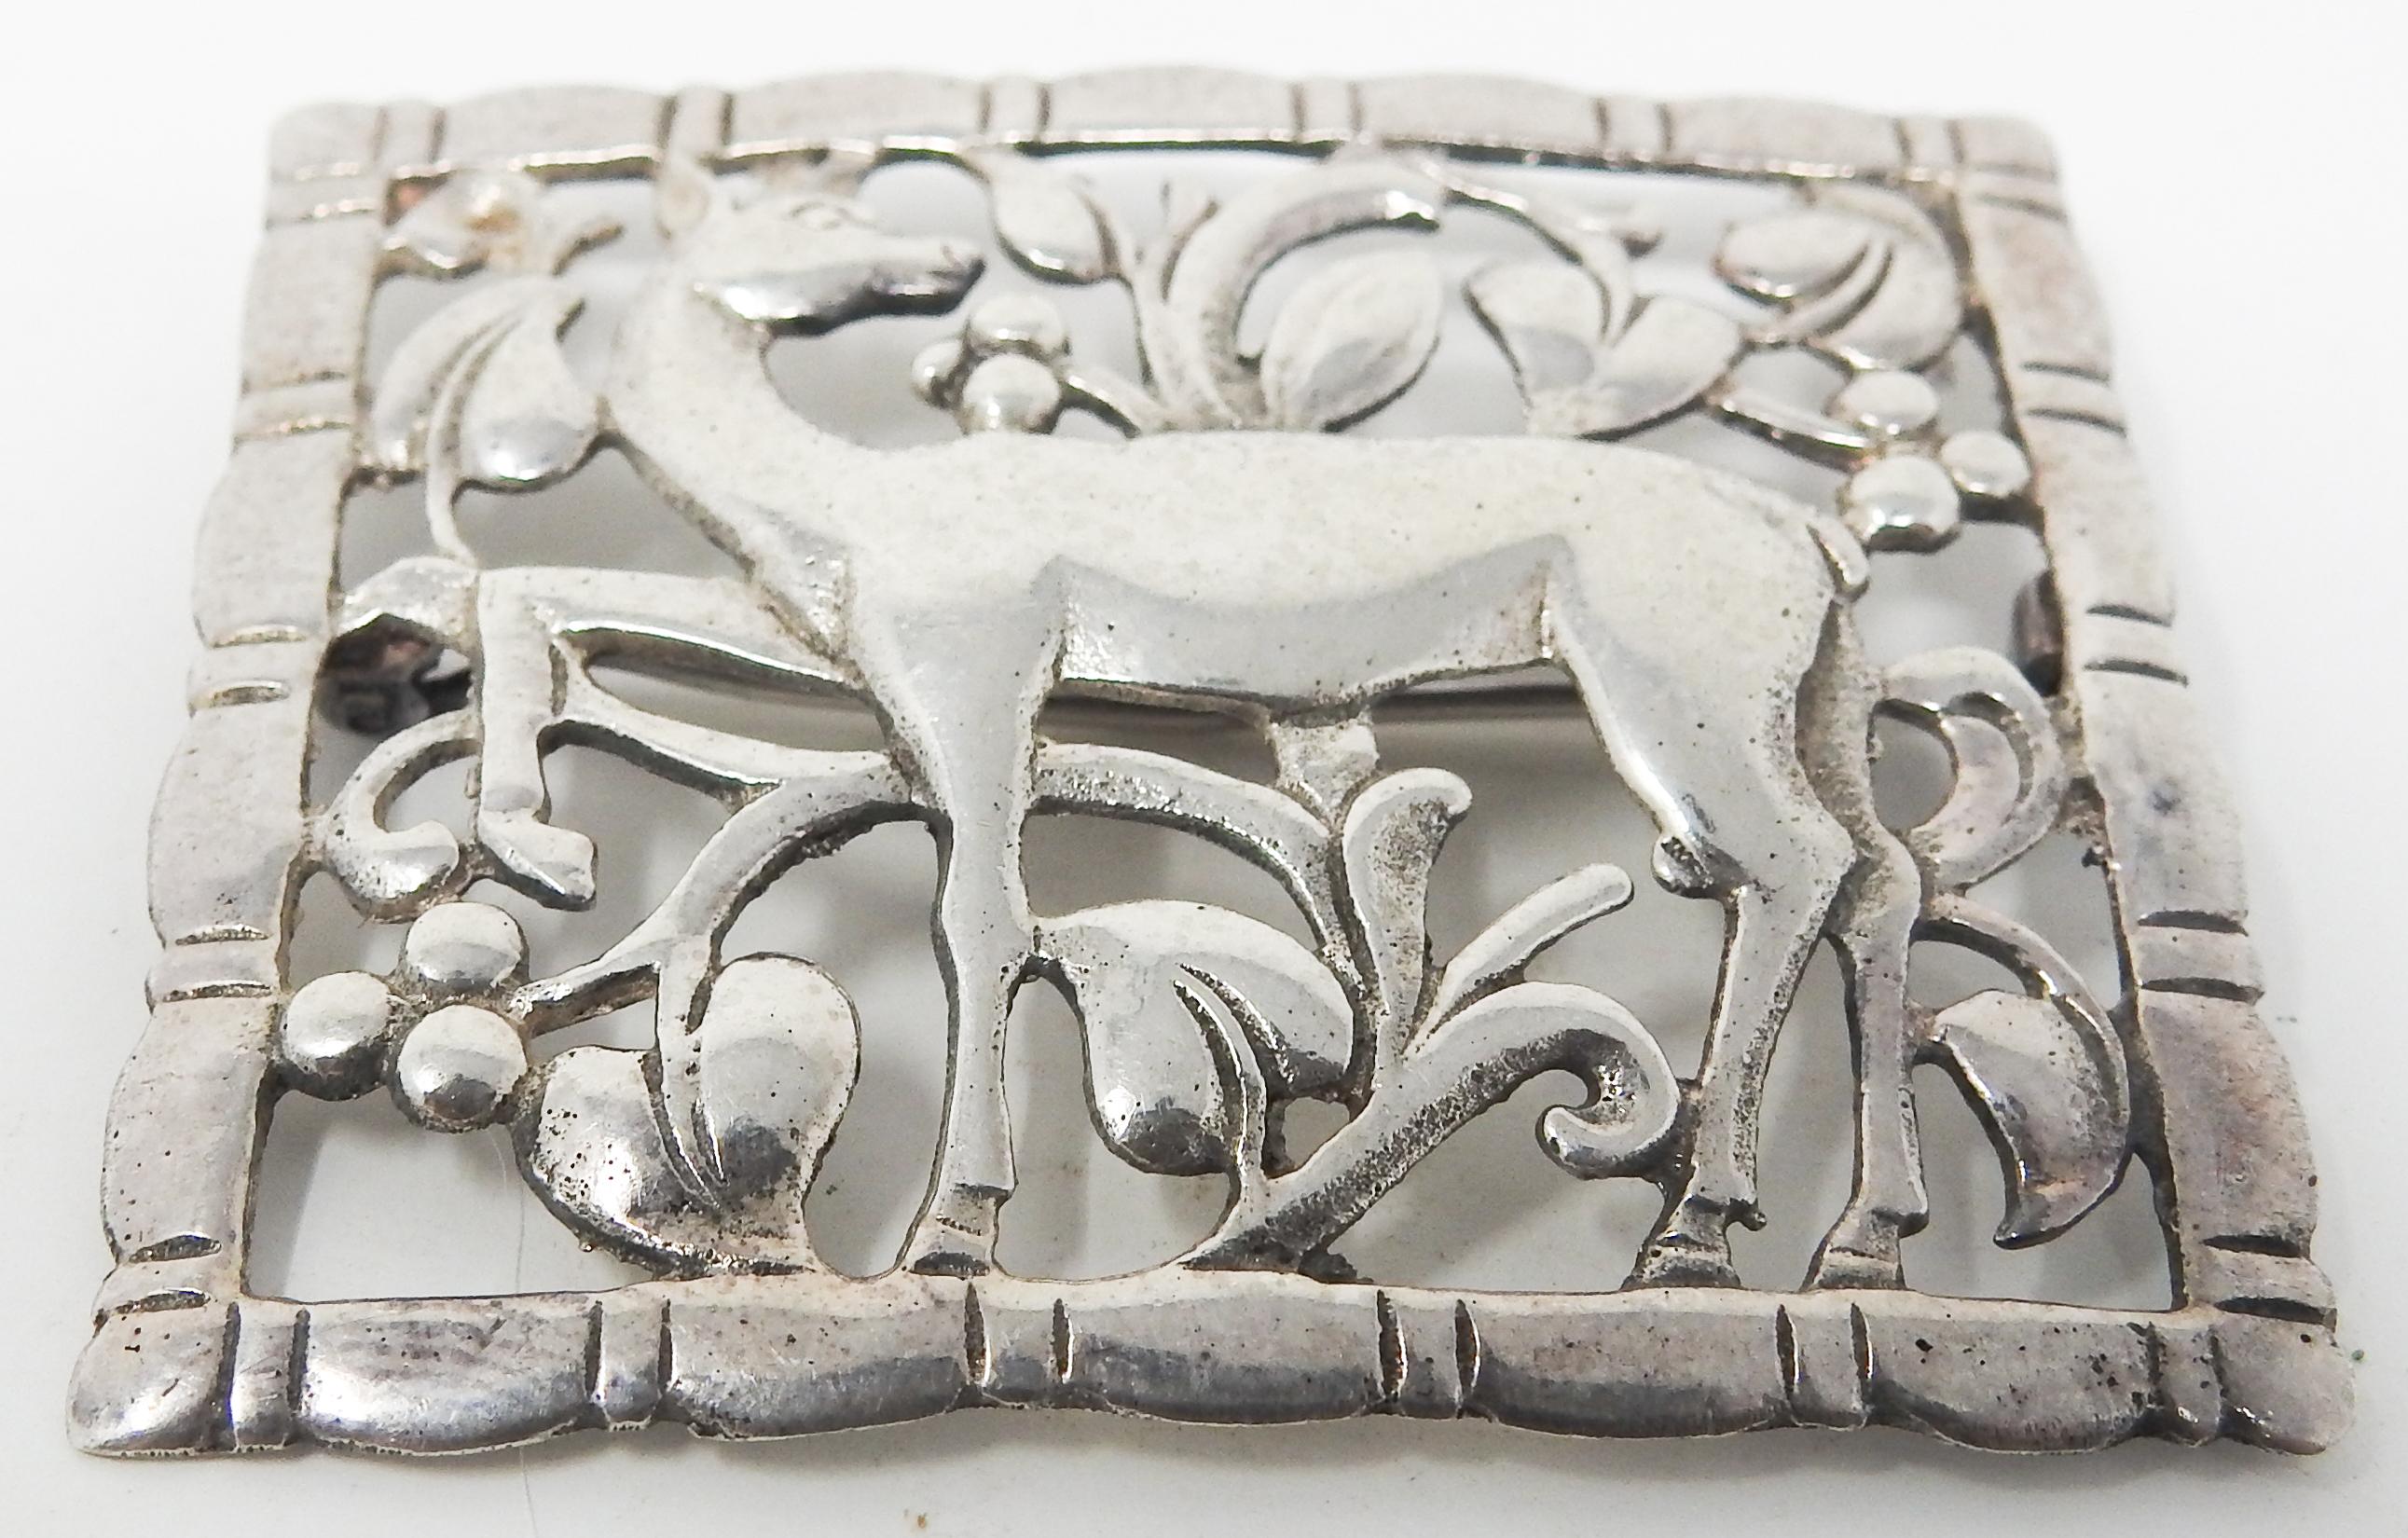 Offering this elegant sterling silver brooch with deer. The deer is depicted standing looking over its back. The background is openwork that is foliate detail. The edge is a simple scalloped edge. The back of the brooch is marked Sterling.